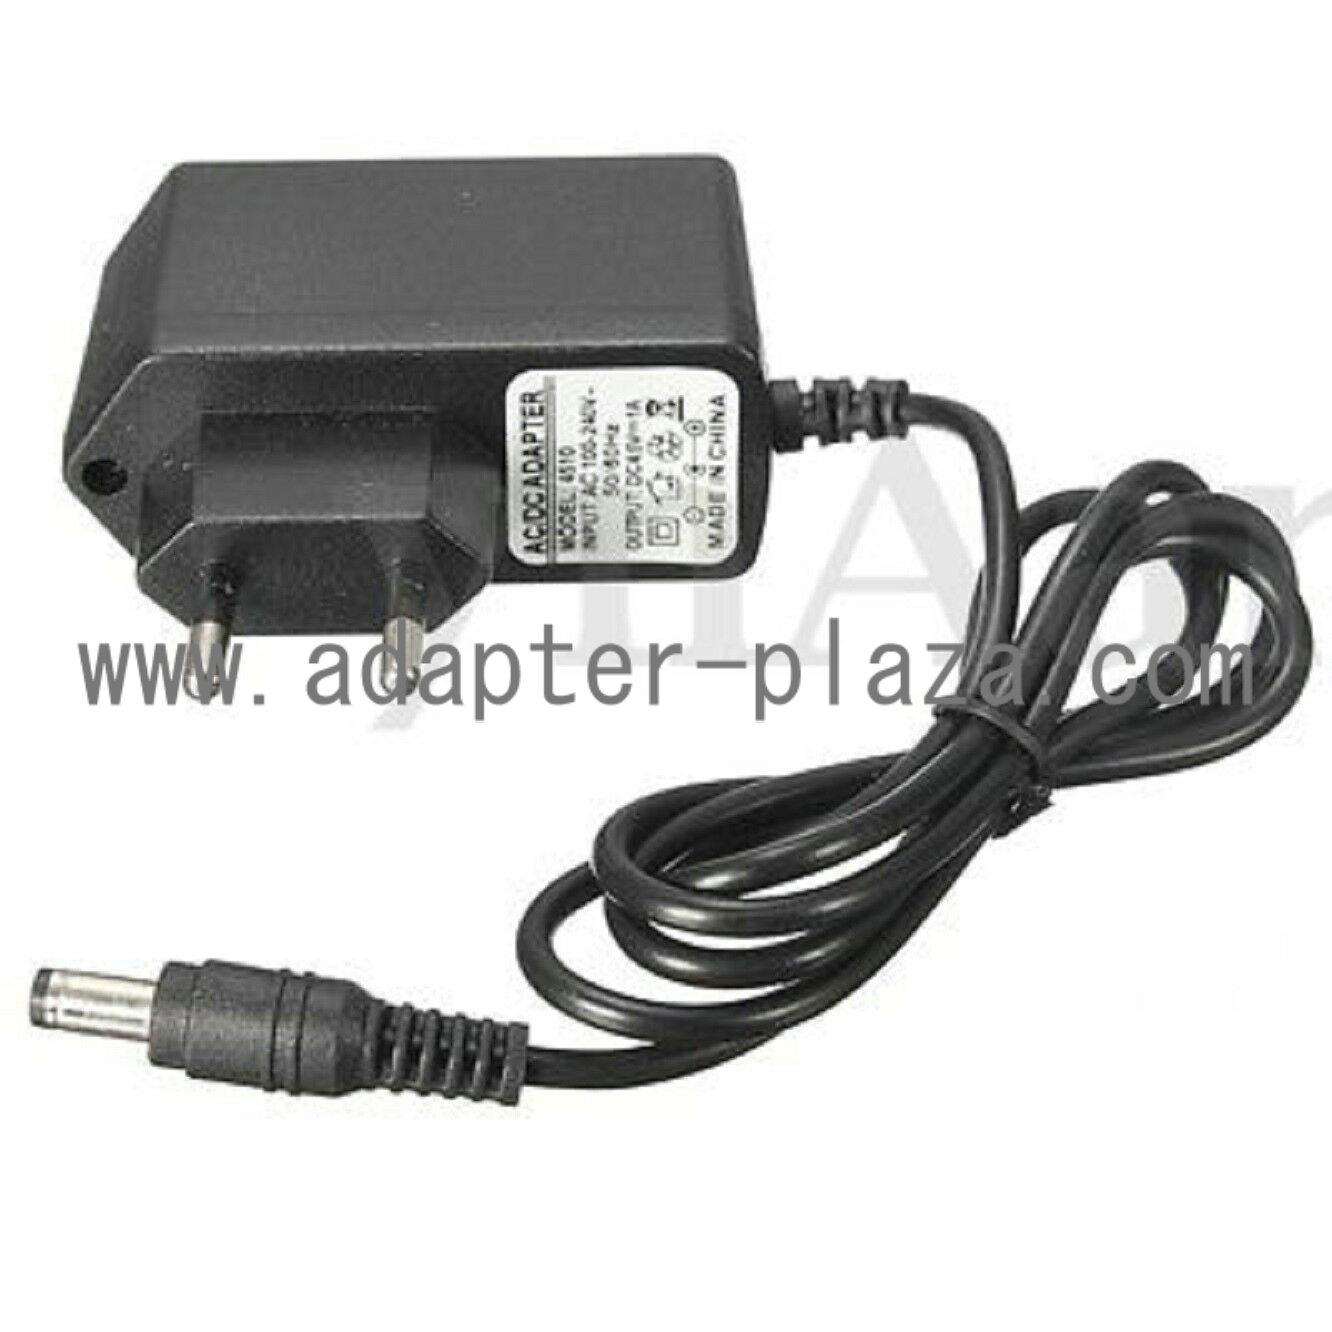 New 4.5V 1A S99 Adapter AC/DC 100-240V Switching Power Supply Charger EU barrel plug 2.5*5.5mm